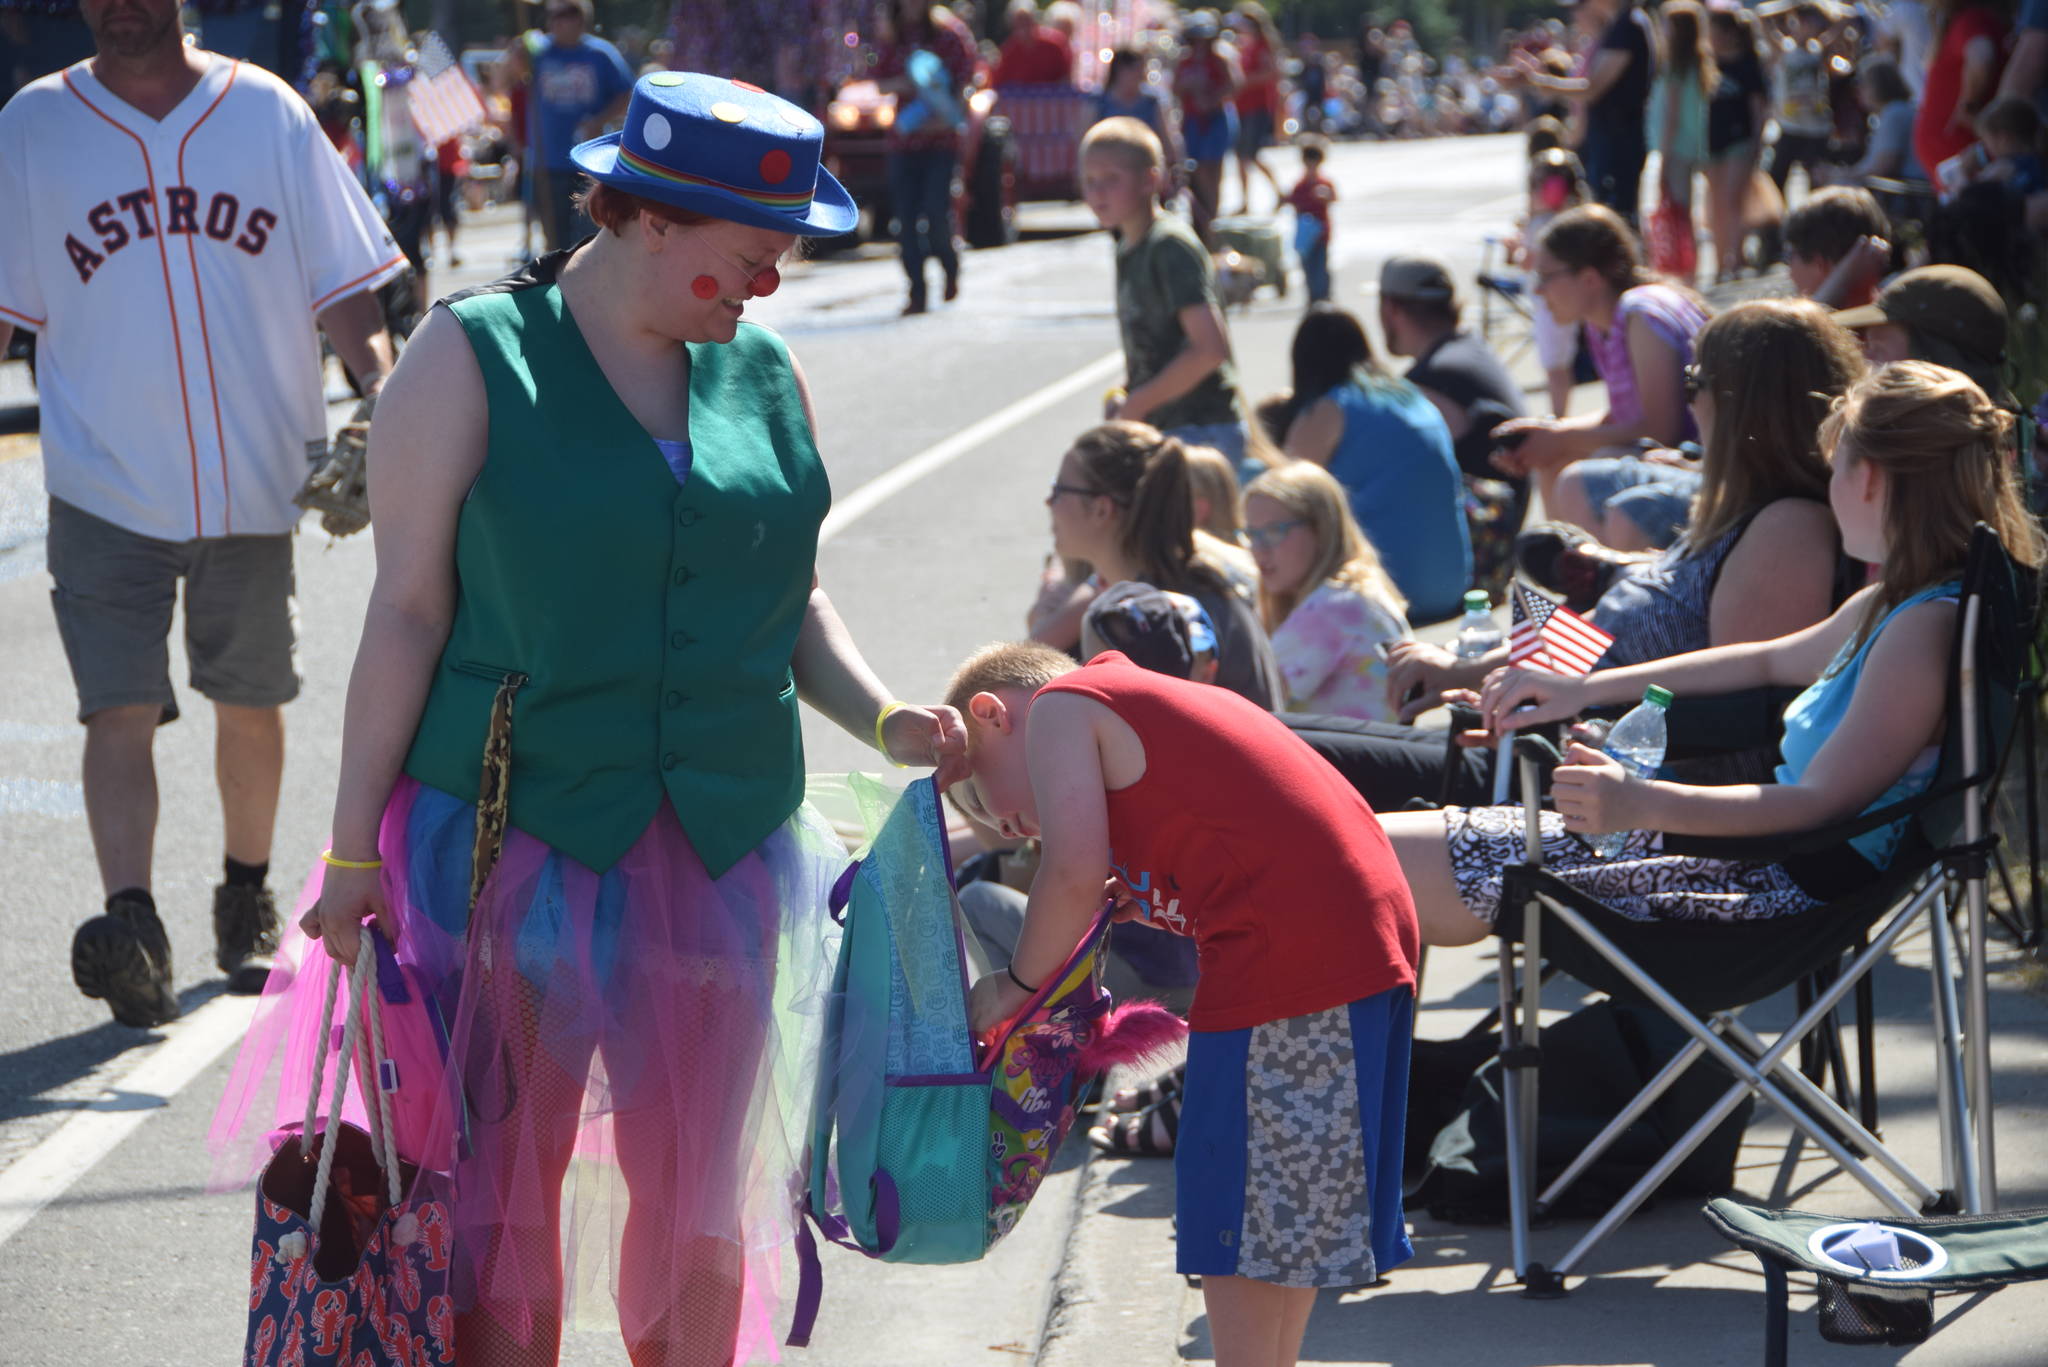 Buttons the clown hands out candy to kids during the July 4th parade in Kenai, Alaska. (Photo by Brian Mazurek/Peninsula Clarion)